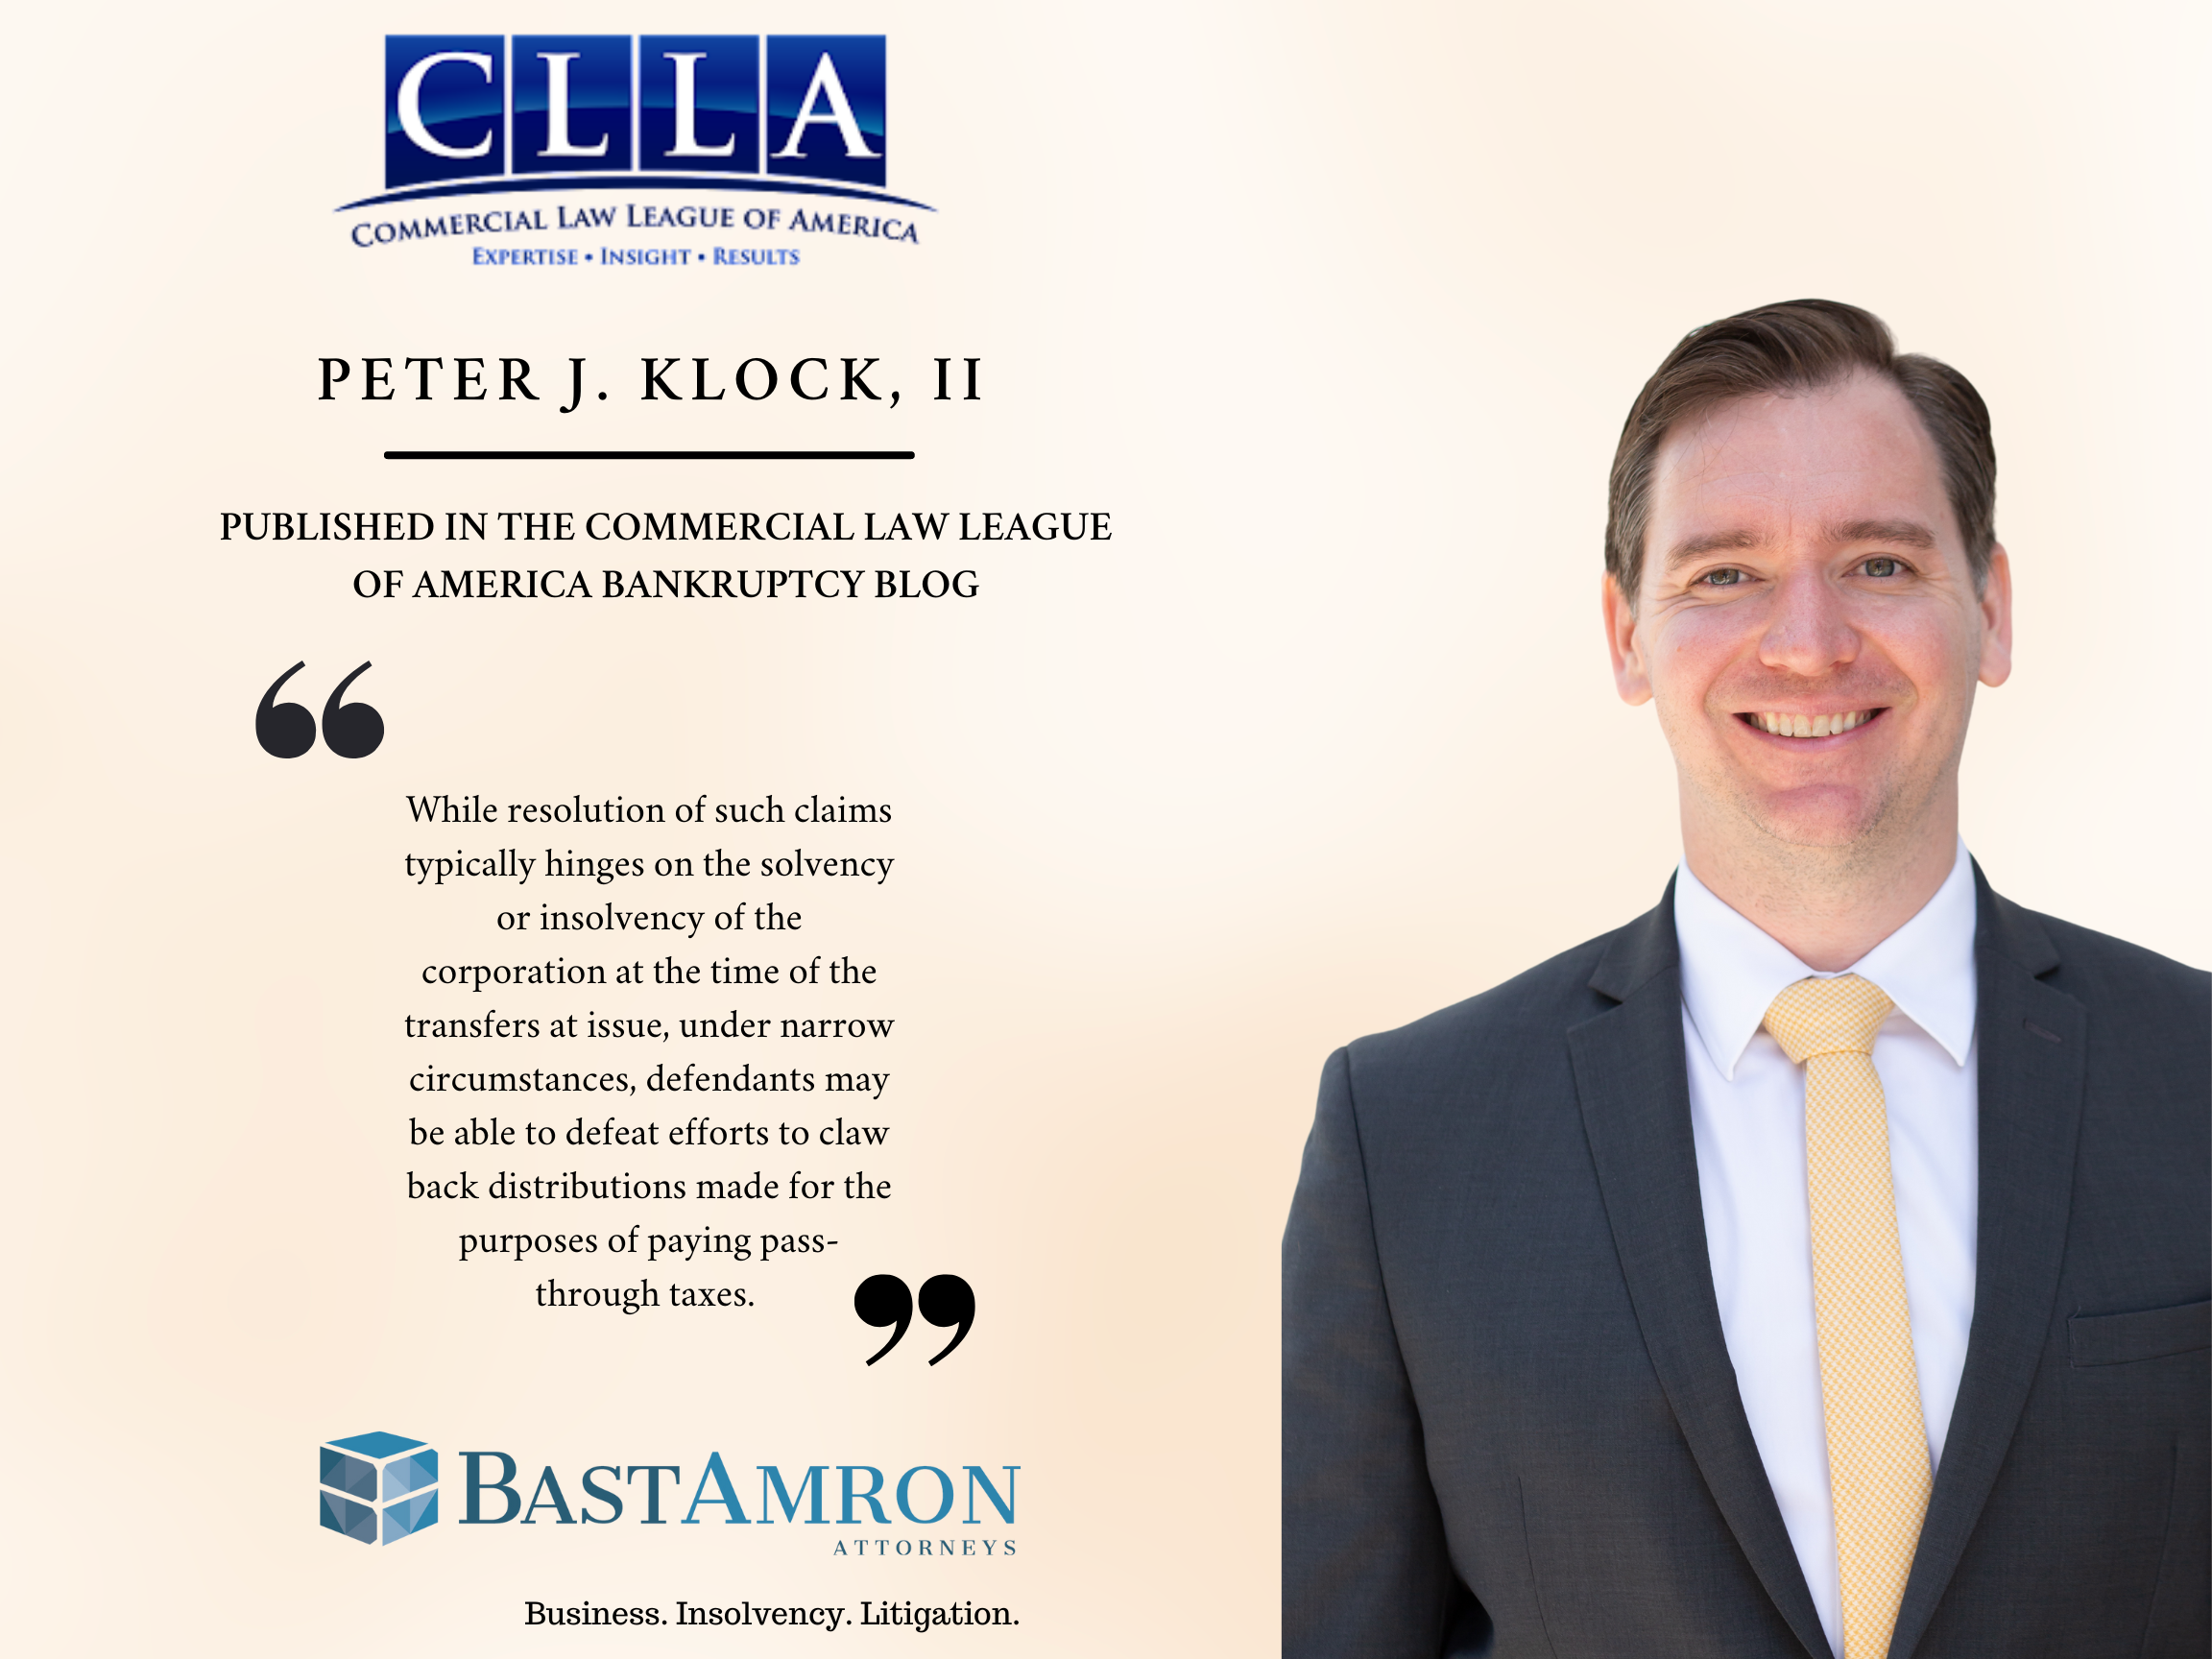 PETER J. KLOCK, II PUBLISHED- EVALUATING FRAUDULENT TRANSFER LIABILITY FOR PASS-THROUGH TAX DISTRIBUTIONS – START WITH THE F-SQUARED OPINION | CLLA BANKRUPTCY BLOG